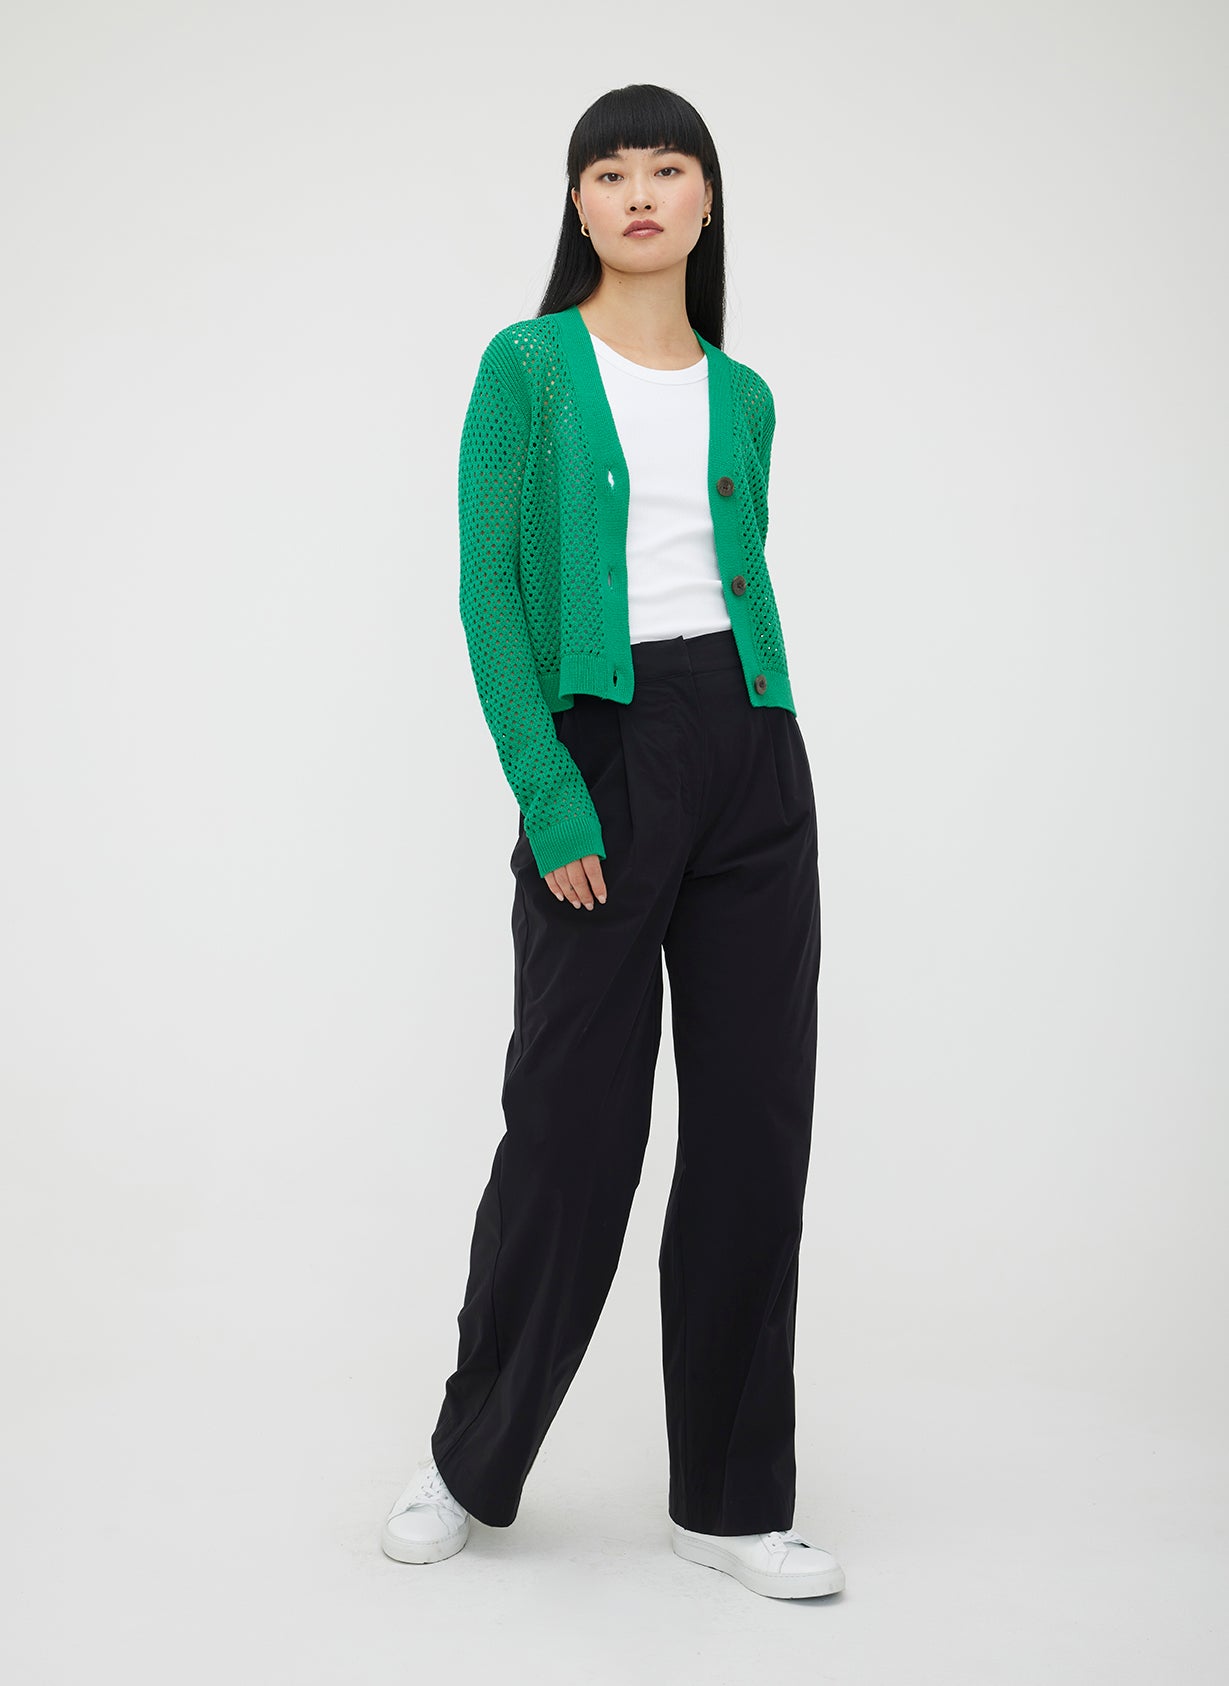 Kit and Ace — Essex Cropped Pointelle Cardigan